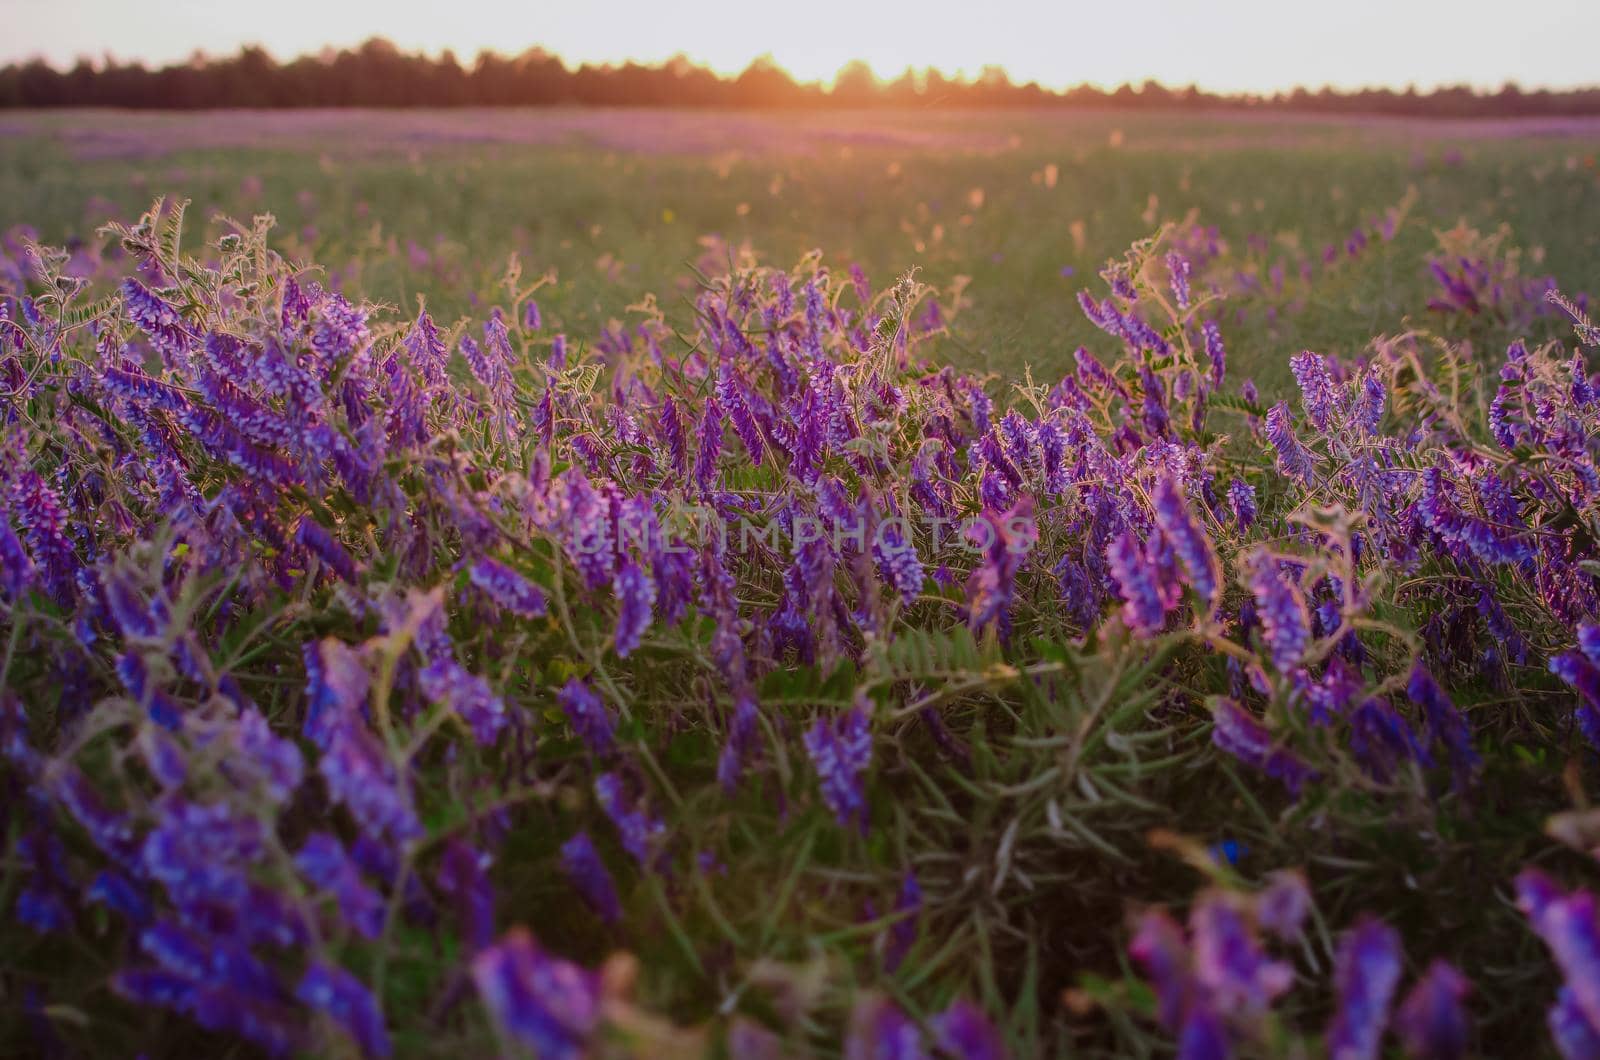 Purple lilac curly tall flowers in a field at sunset day. by AndriiDrachuk